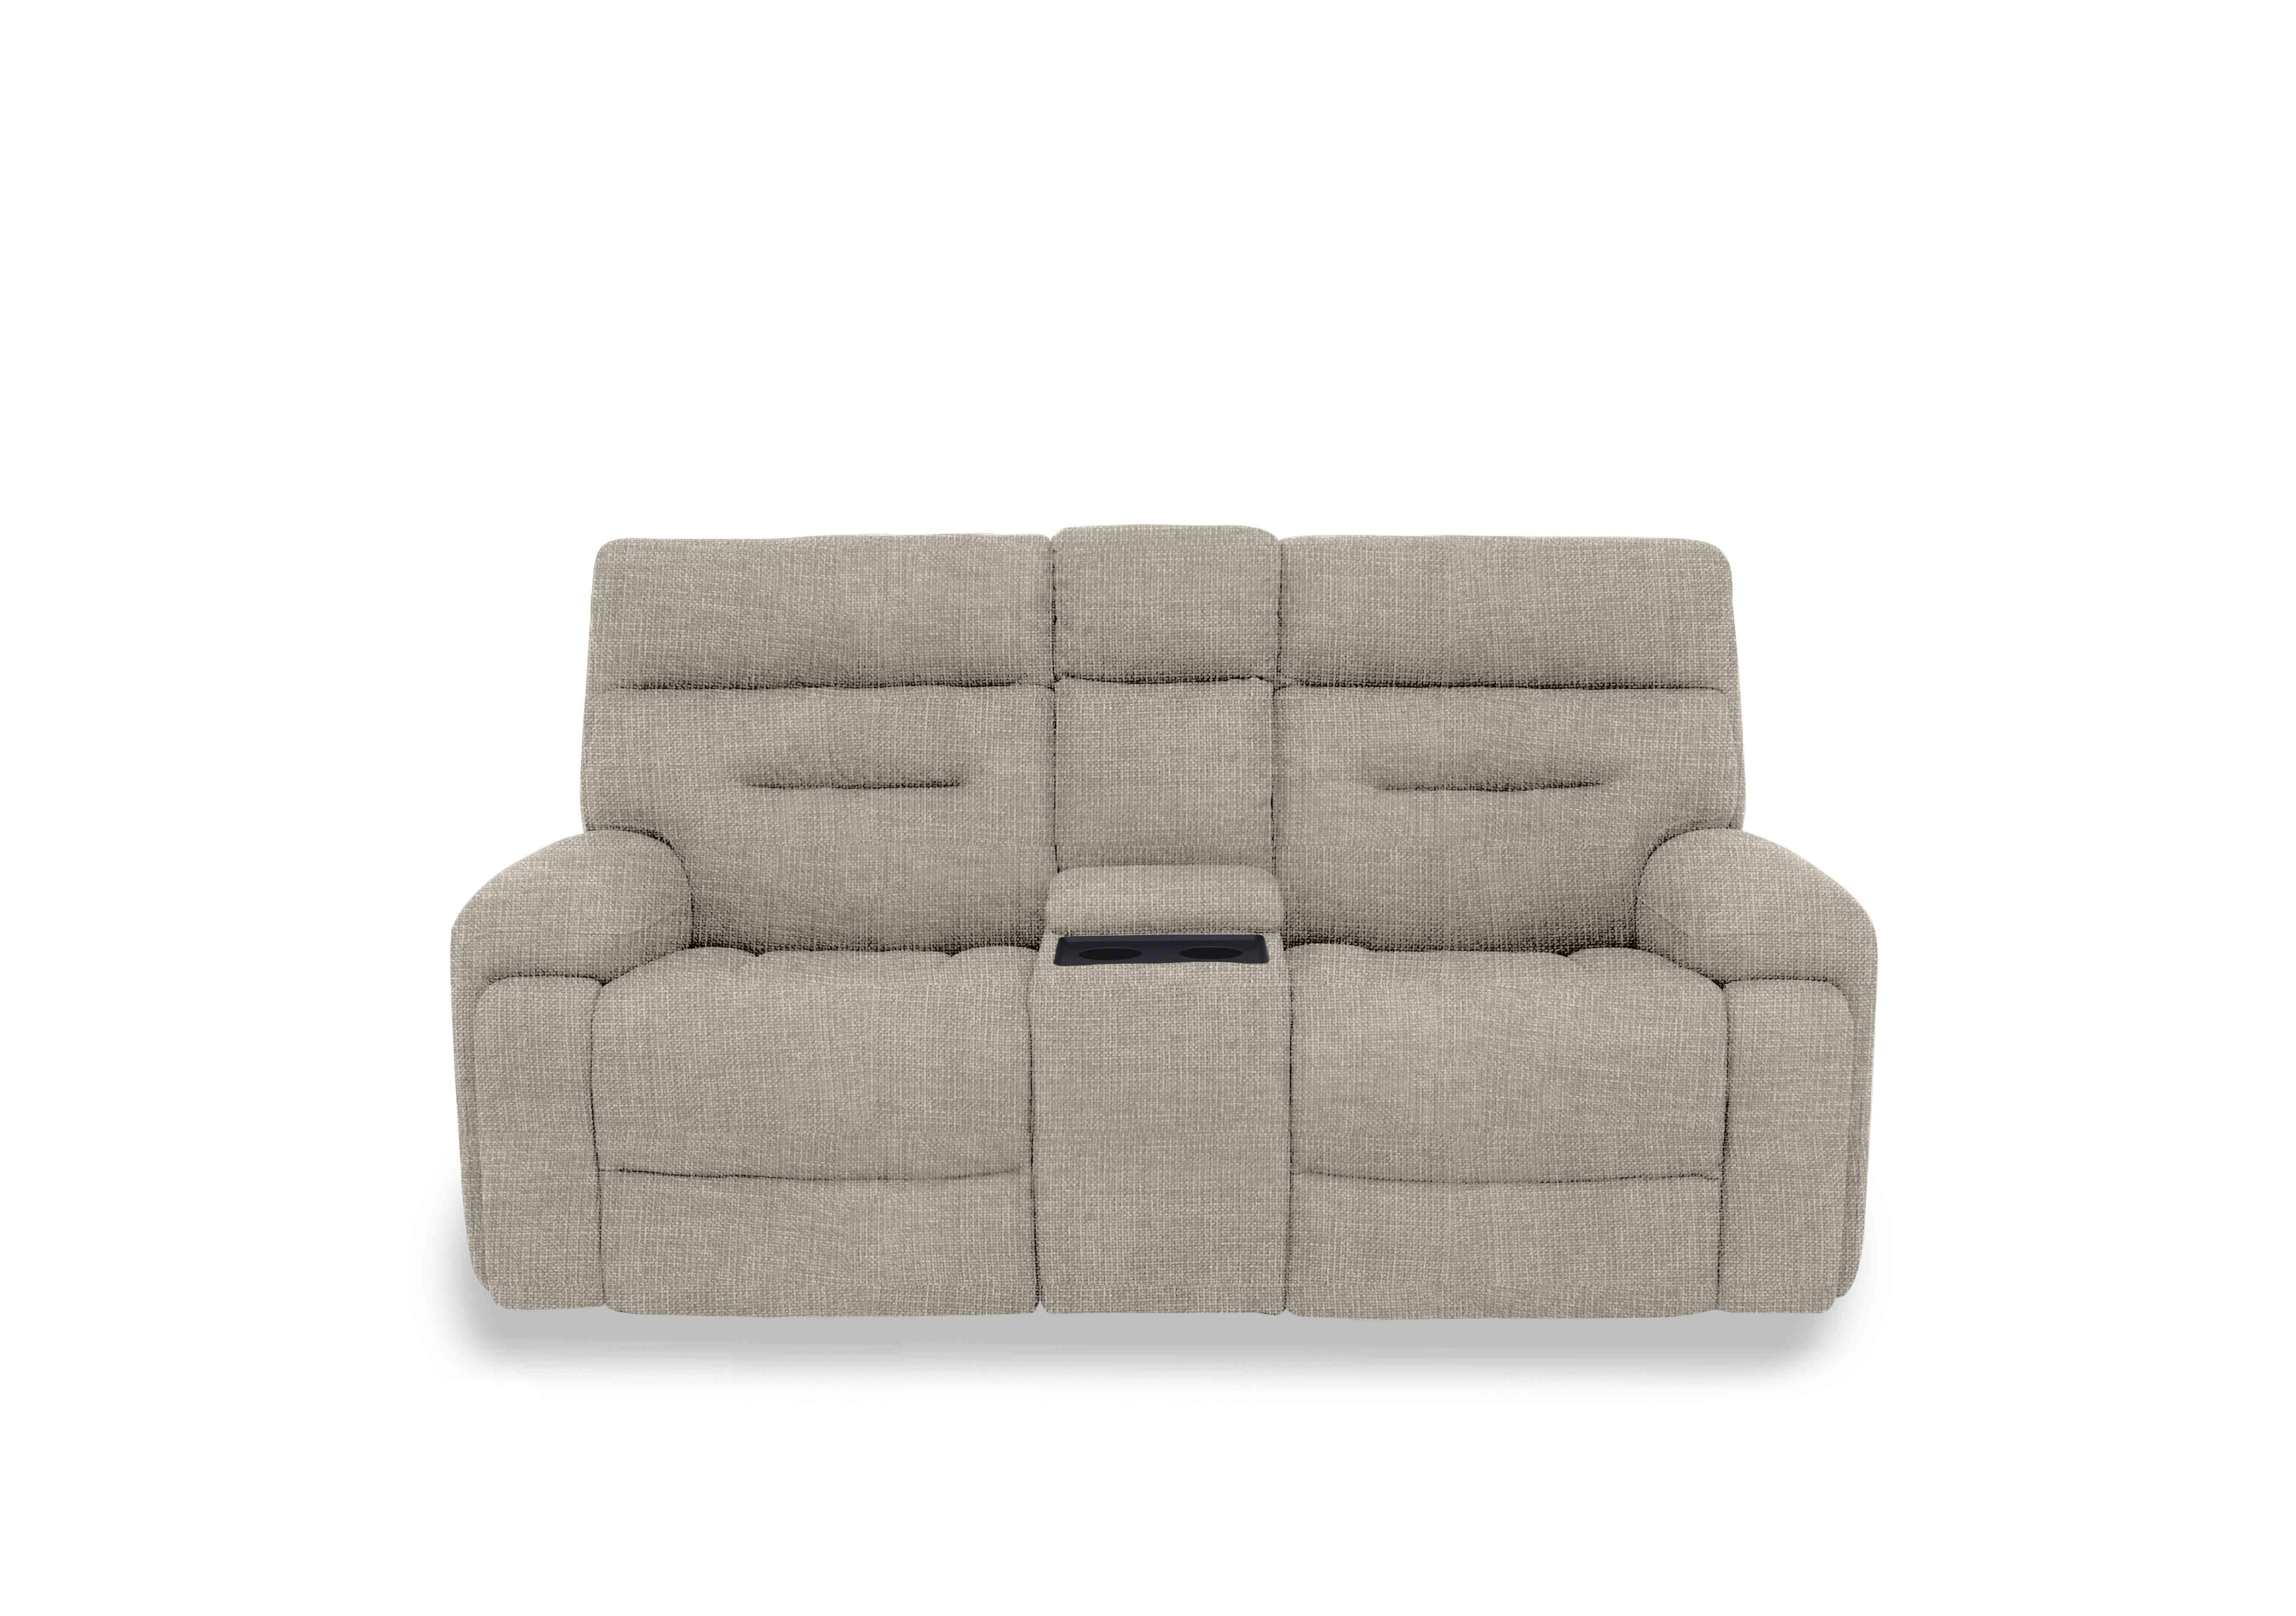 Cinemax Media 2 Seater Fabric Power Recliner Sofa with Power Headrests in Hf-0103 Halifax Sand on Furniture Village